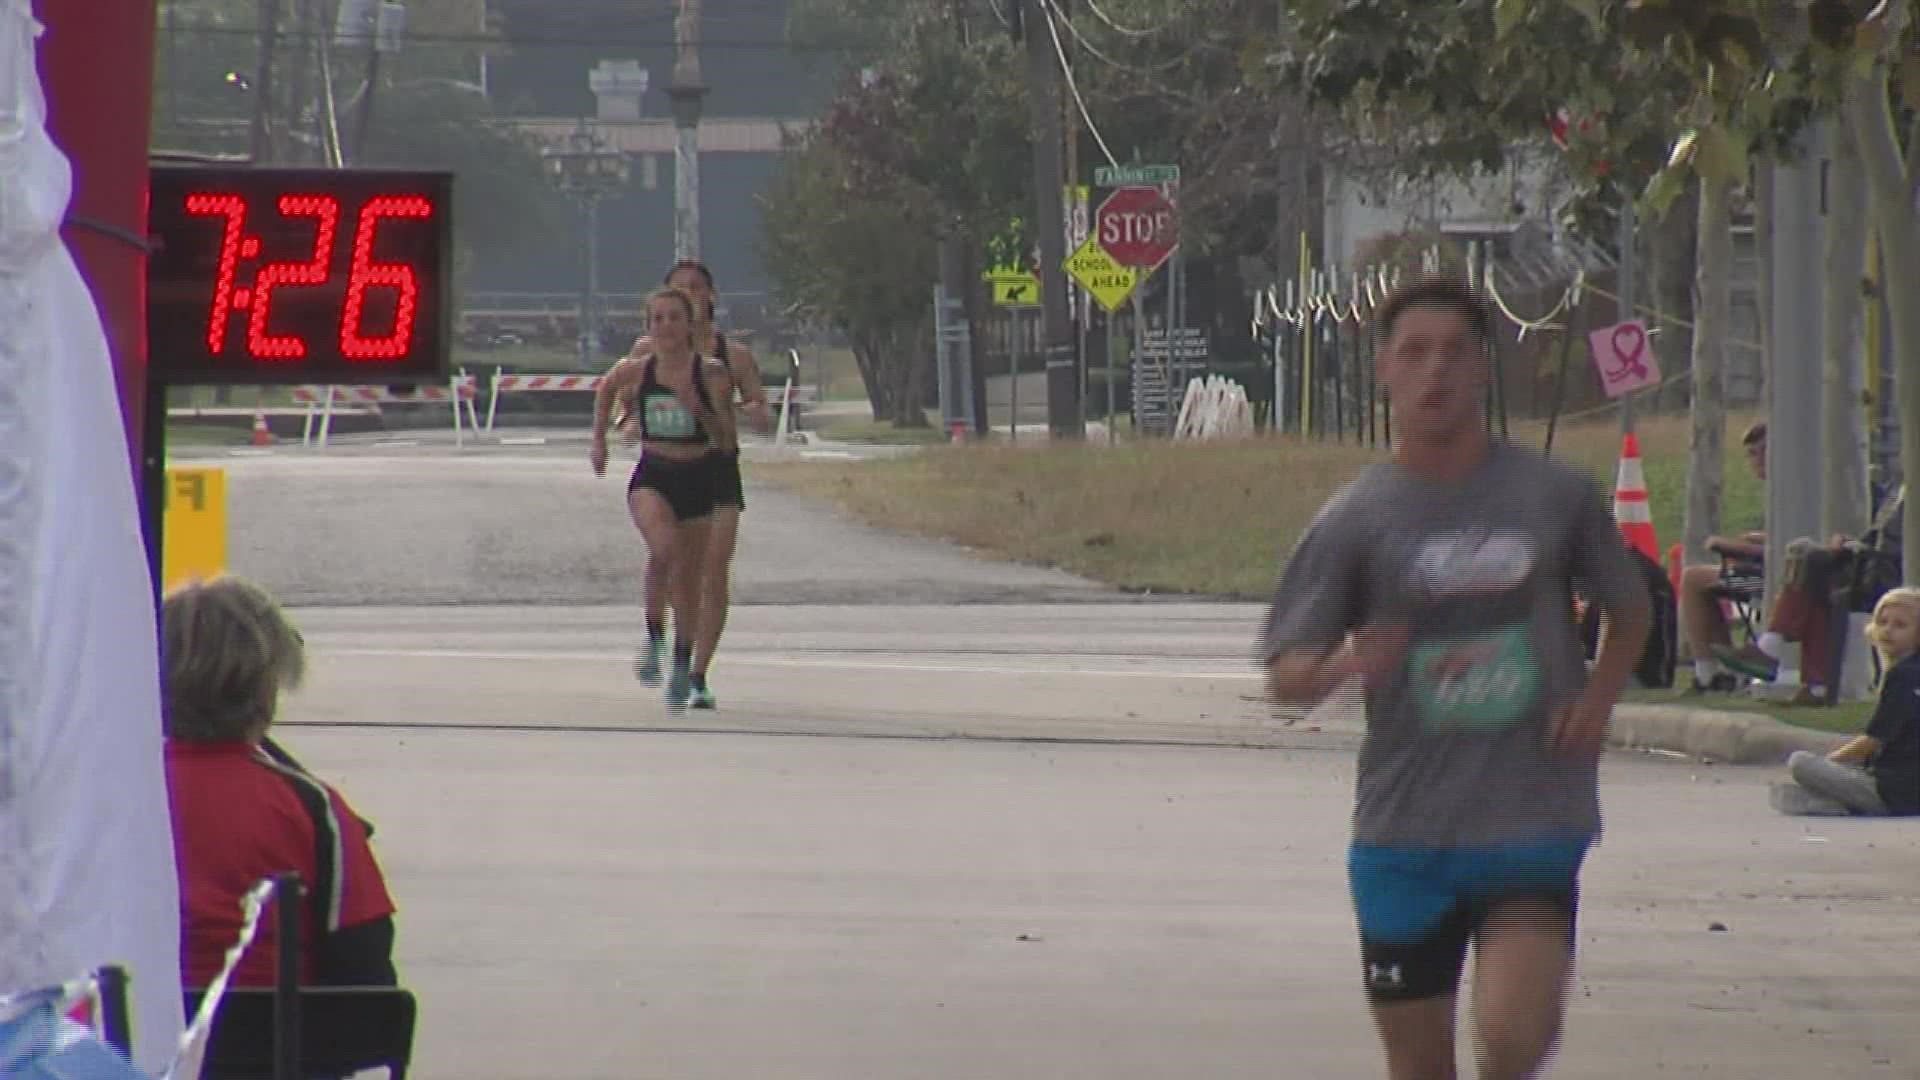 The tradition is put on by the Sea Rim Striders run club. The organization works to raise money for  nonprofits in Southeast Texas.